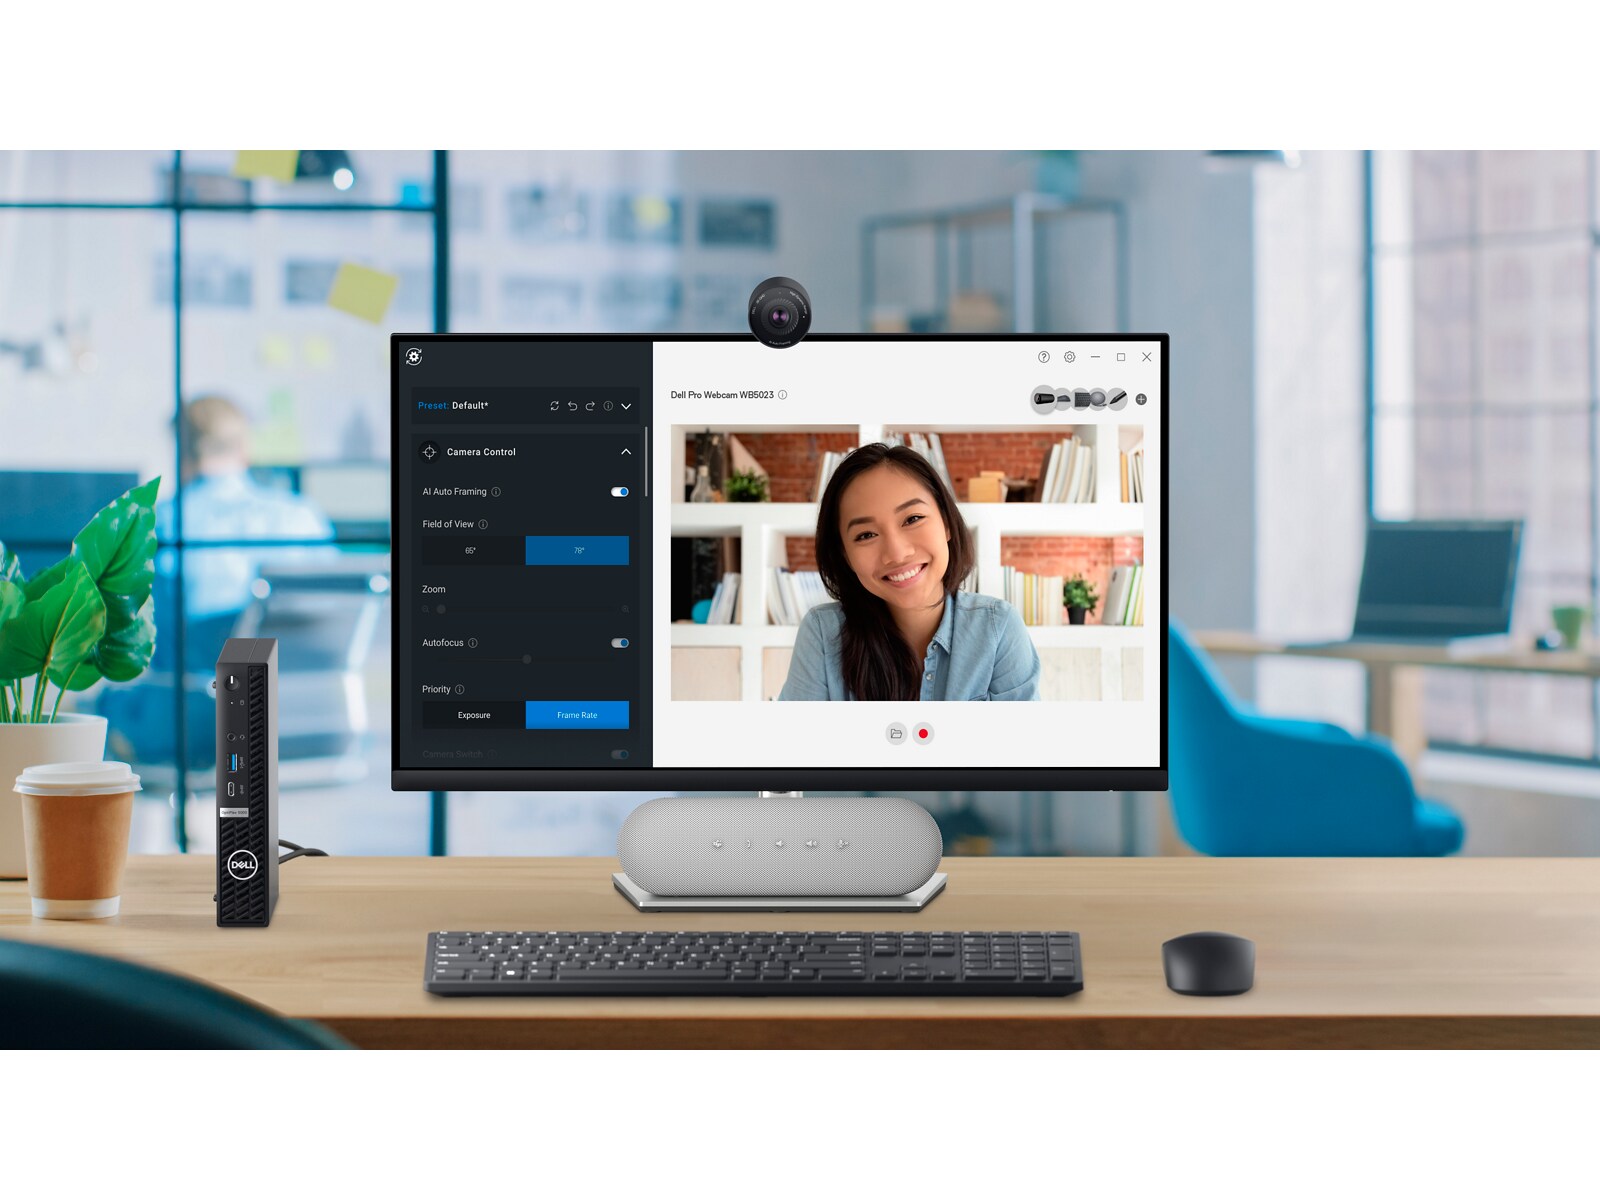 Monitor and Work Desk Setup with a Woman on a Video Call